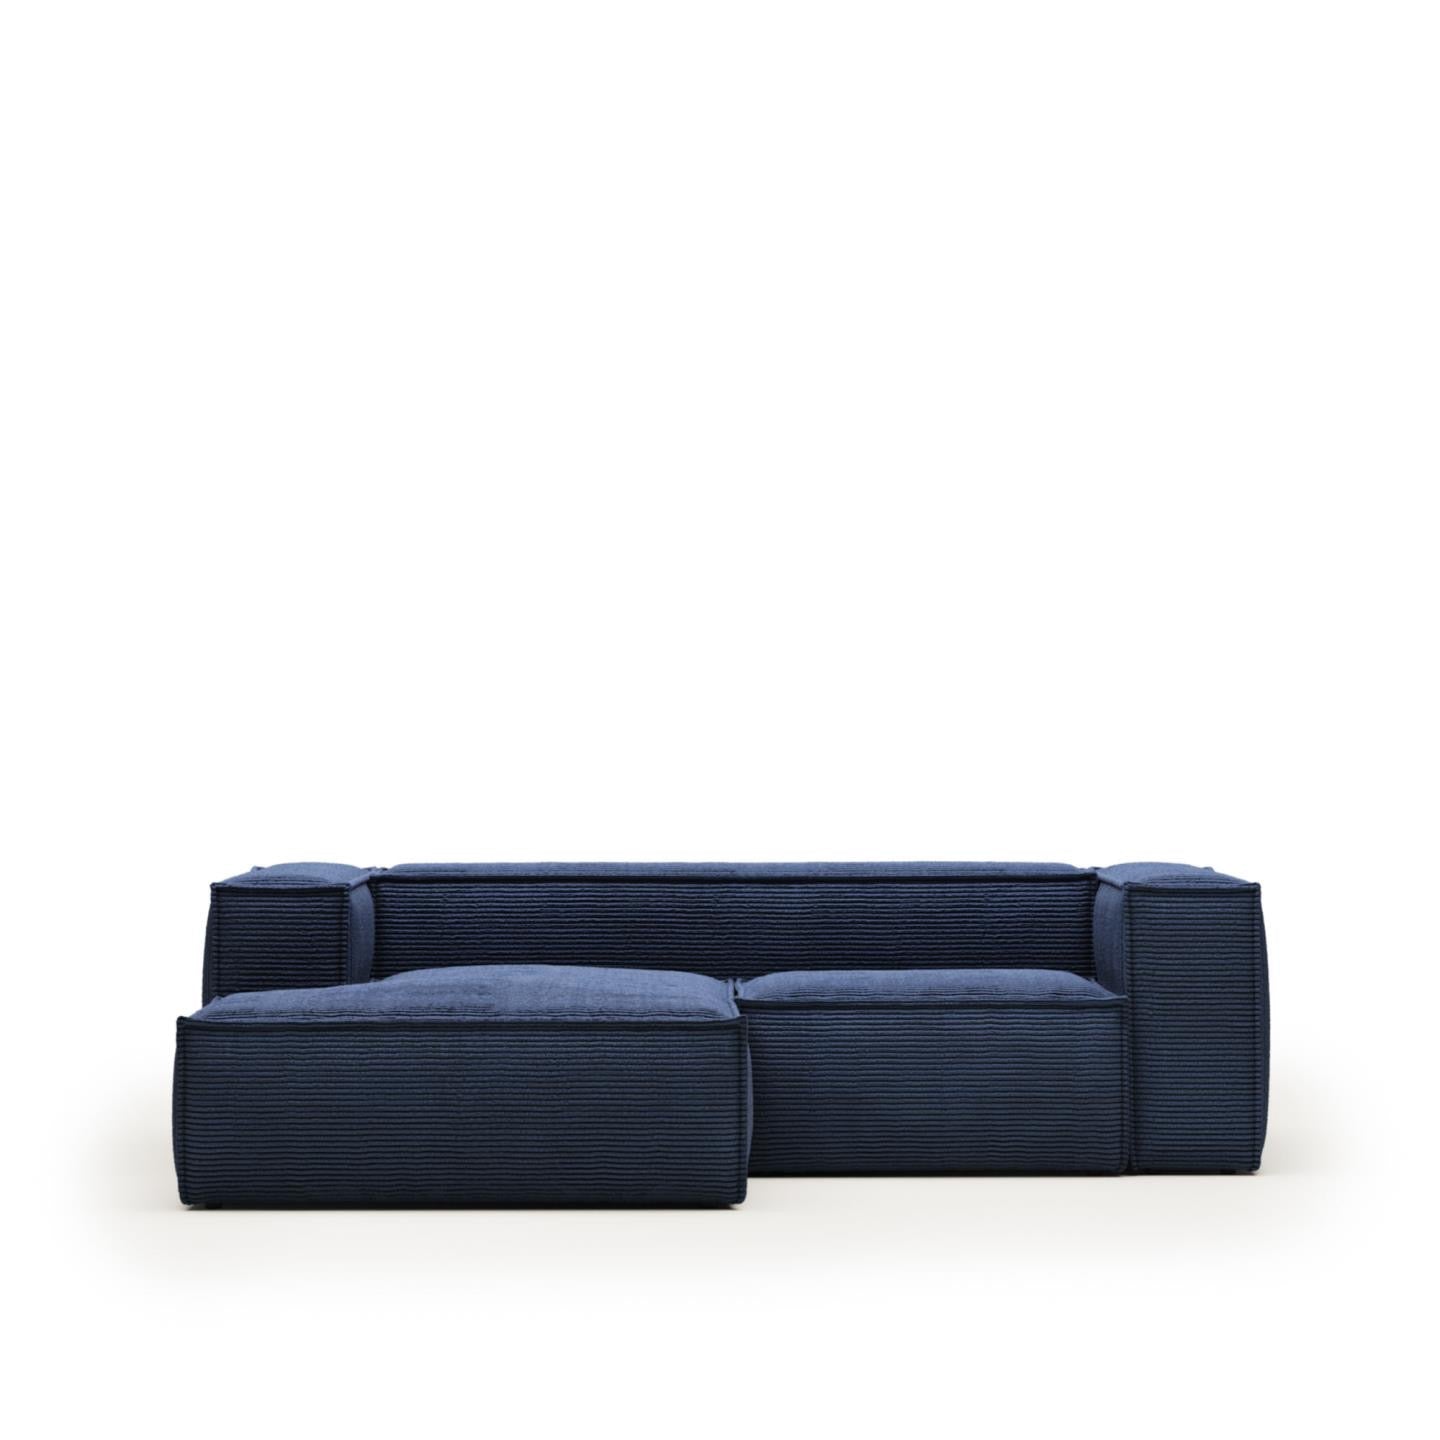 Lund 2 Seater Sofa with Left Side Chaise - Blue Corduroy